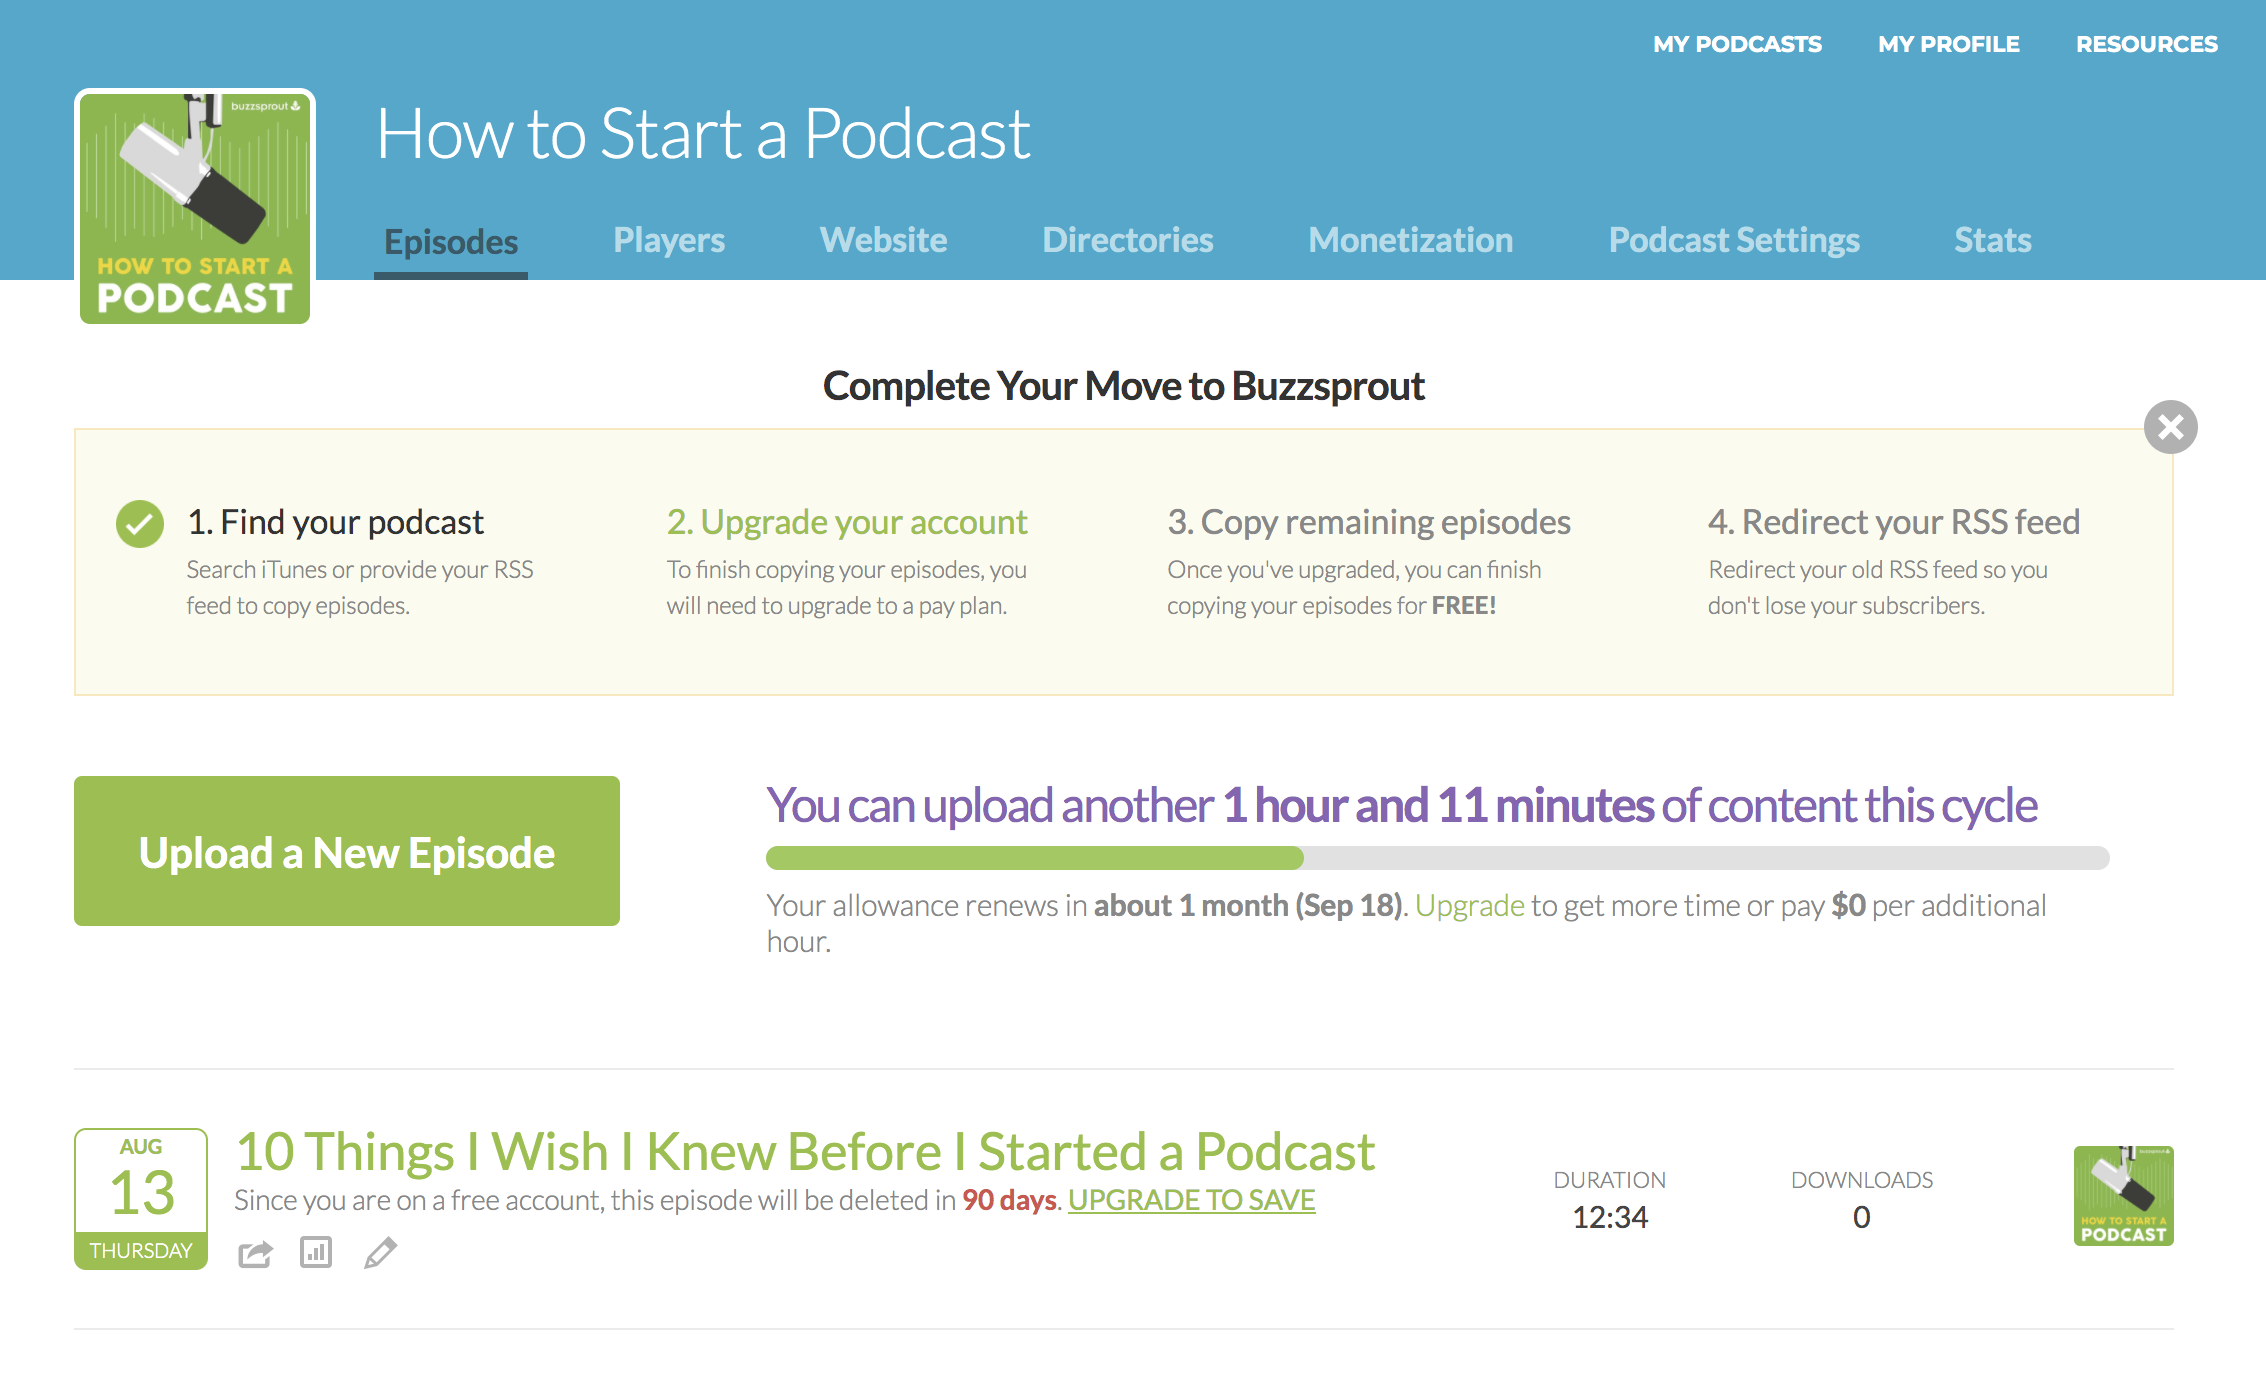 How To Start A Podcast - Buzzsprout